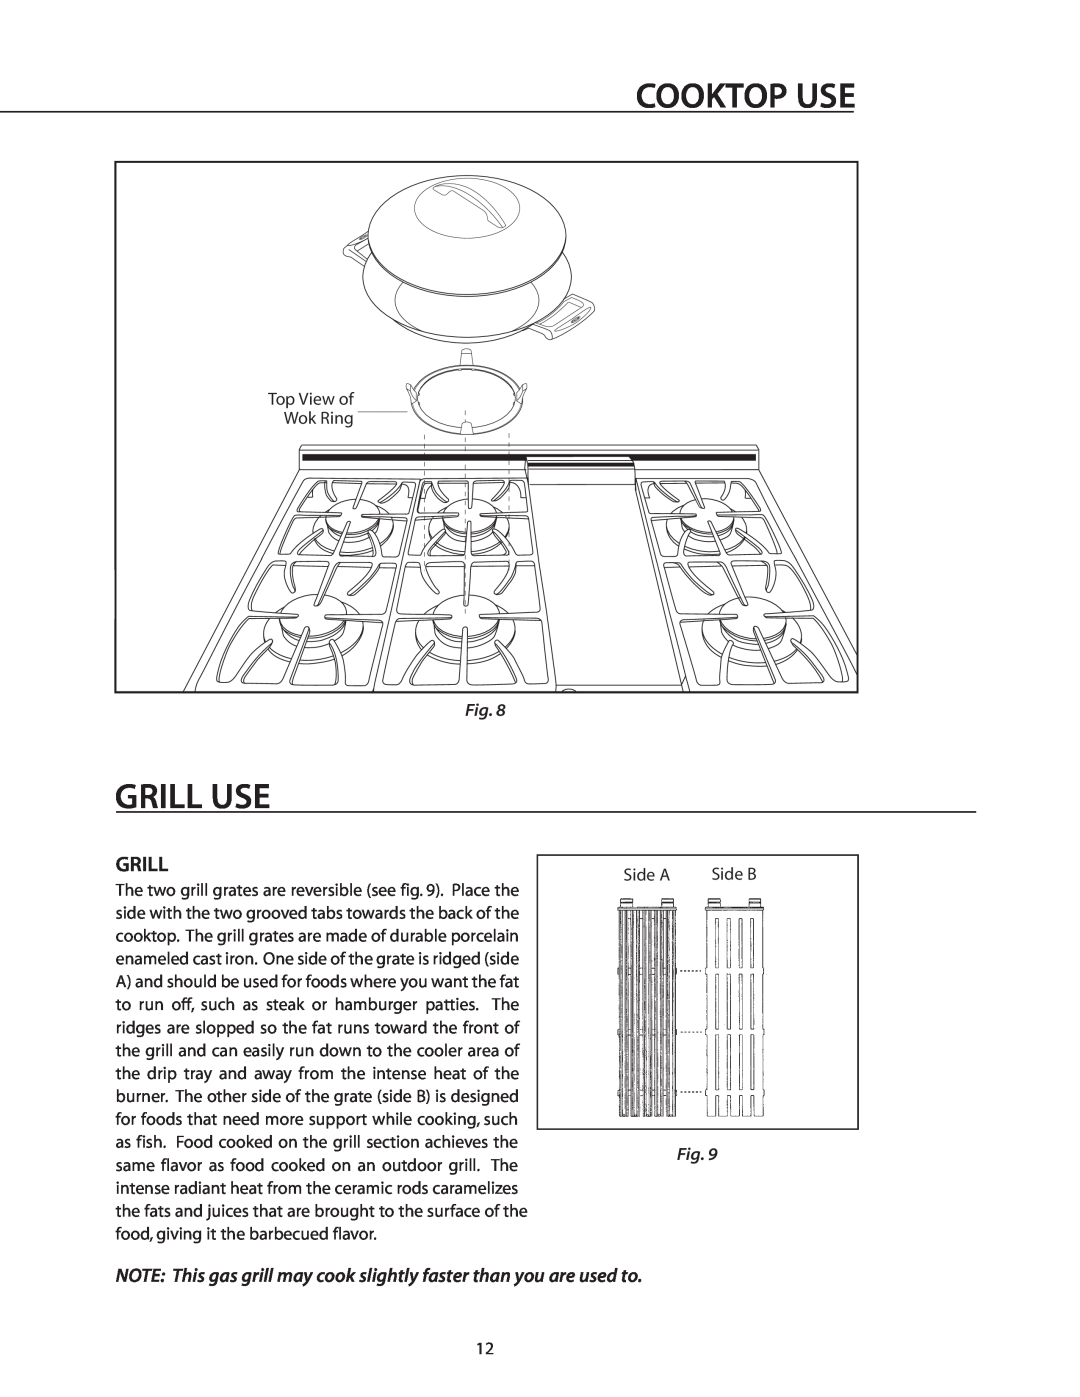 DCS RDS-486GL, RDS-364GD, RDS-366 Grill Use, NOTE This gas grill may cook slightly faster than you are used to, Cooktop Use 